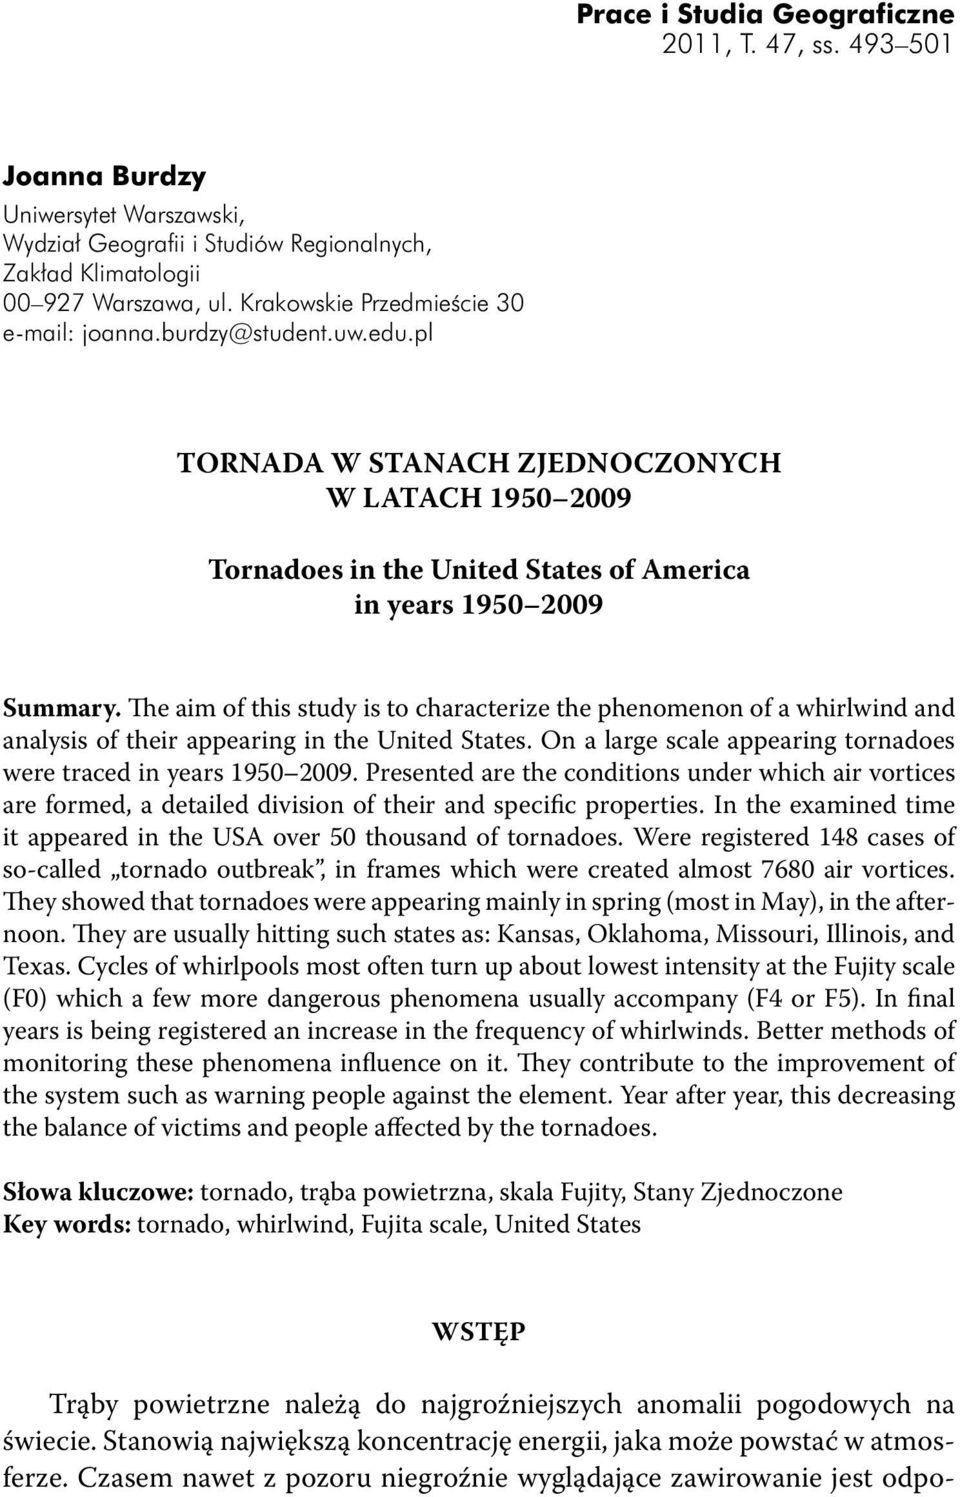 The aim of this study is to characterize the phenomenon of a whirlwind and analysis of their appearing in the United States. On a large scale appearing tornadoes were traced in years 1950 2009.